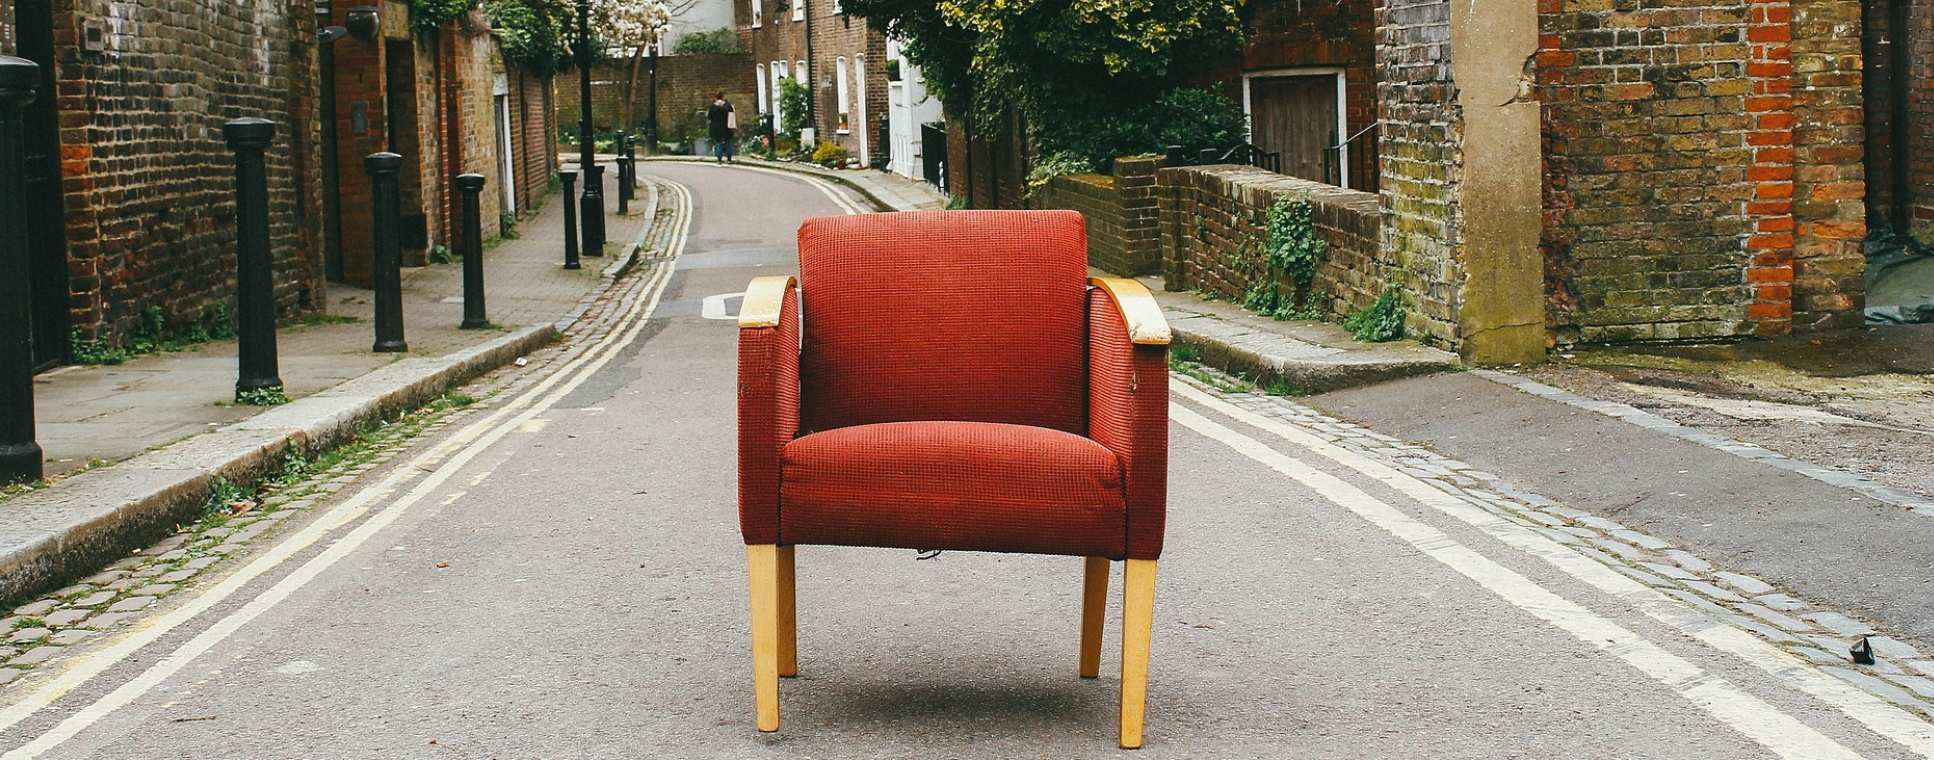 Chair in middle of a residential street